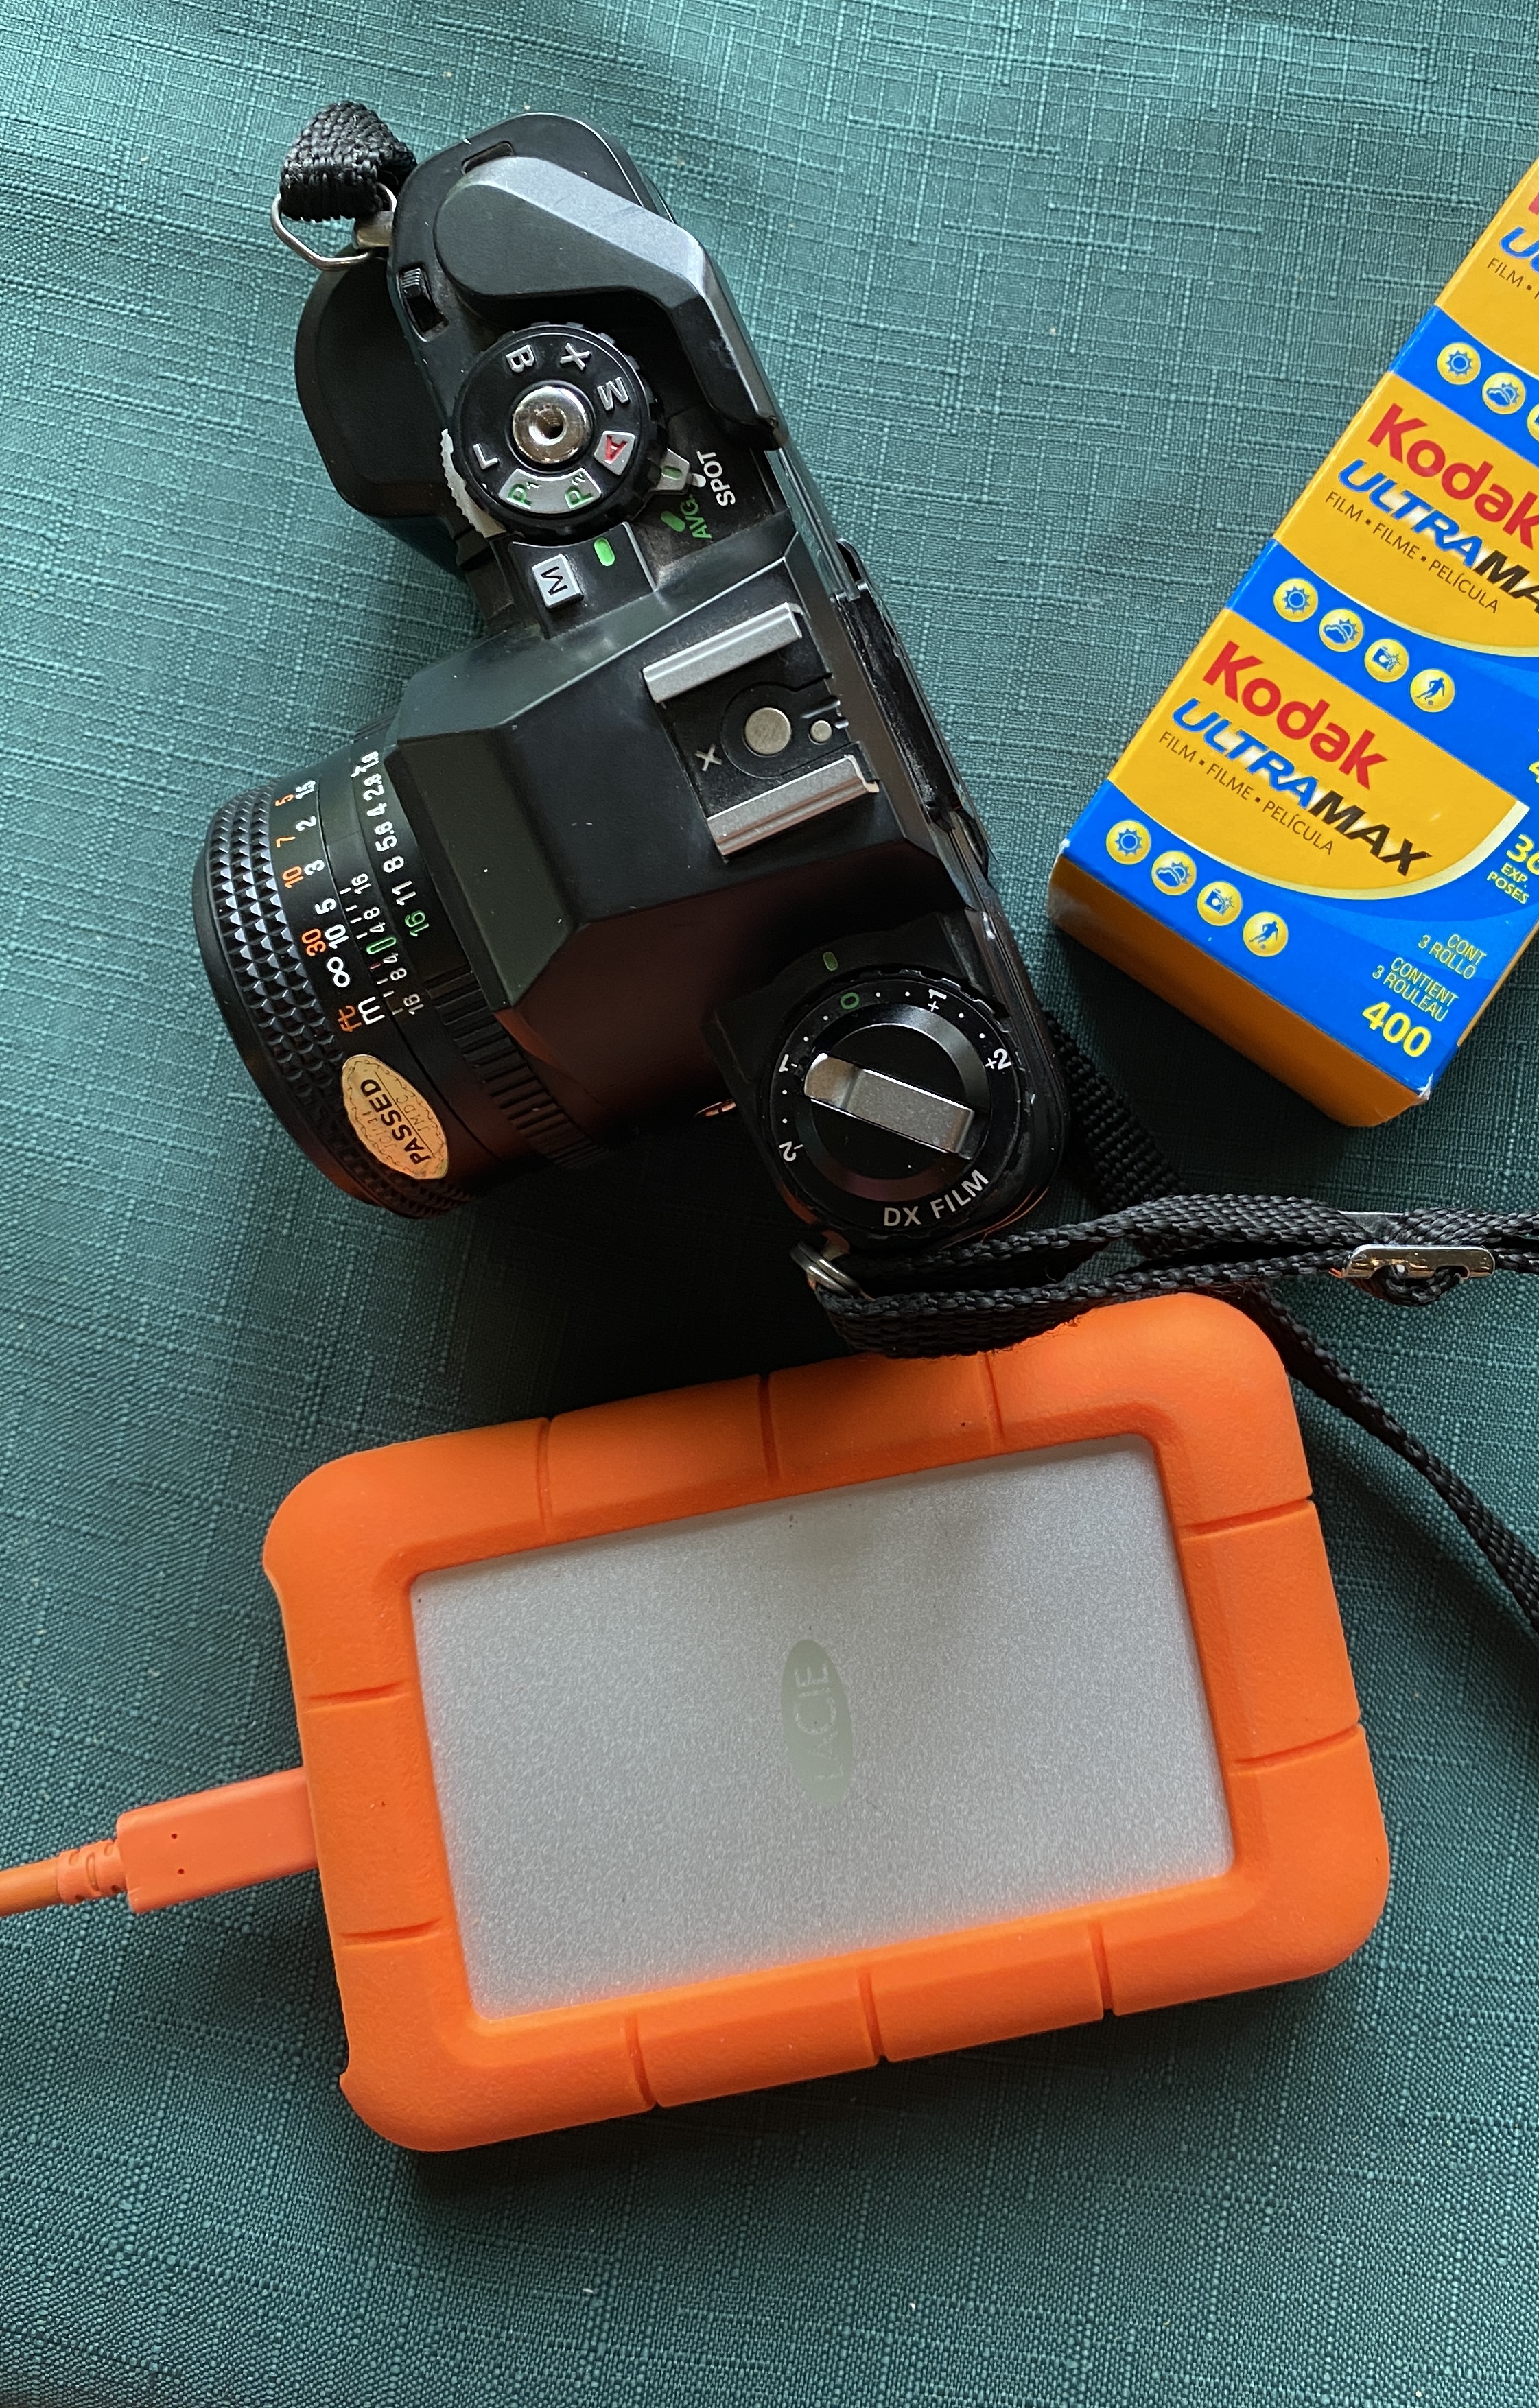 Old camera film and external drive